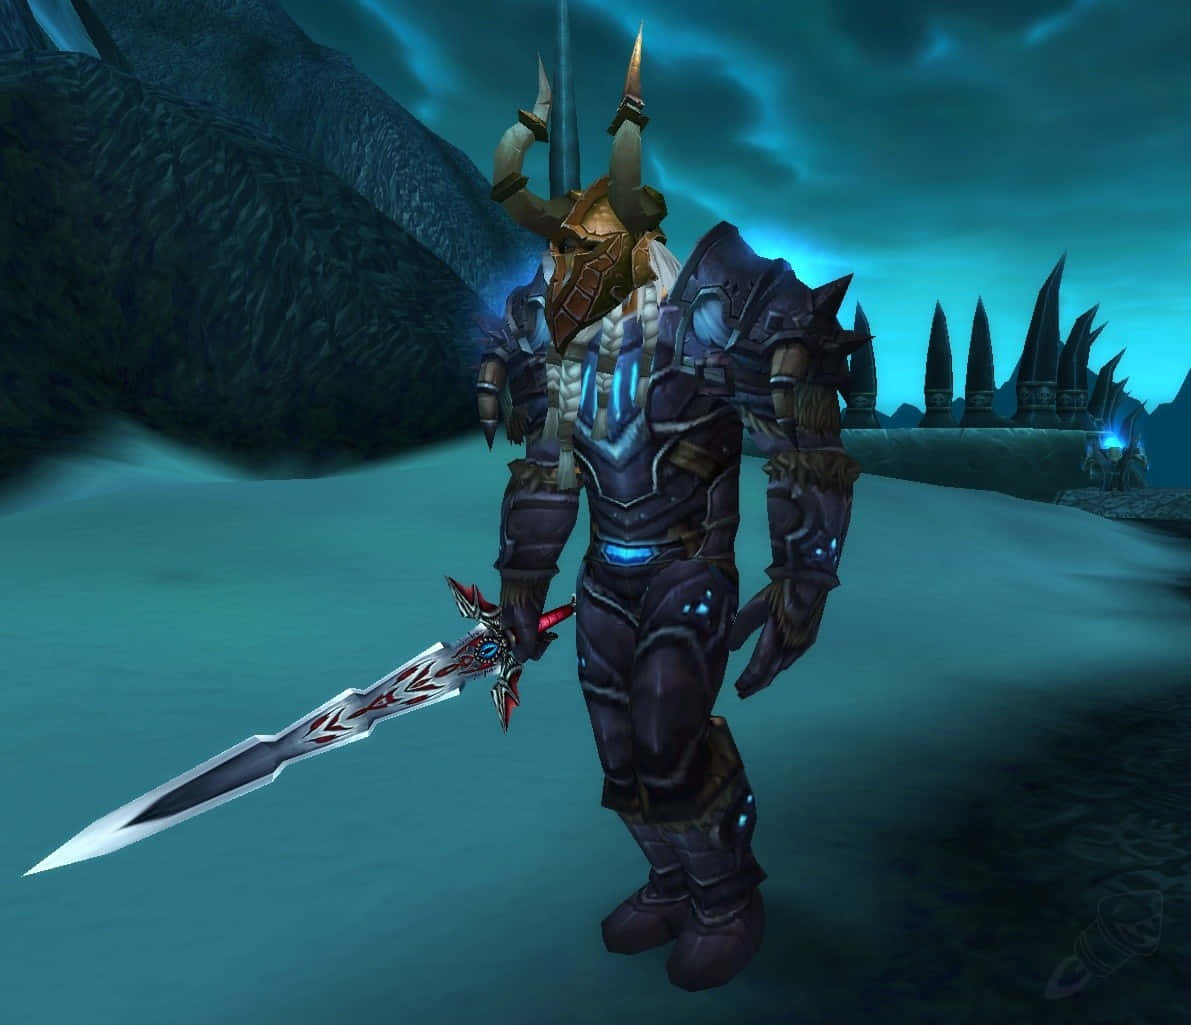 The ominous figure of a Death Knight emerges from the shadows